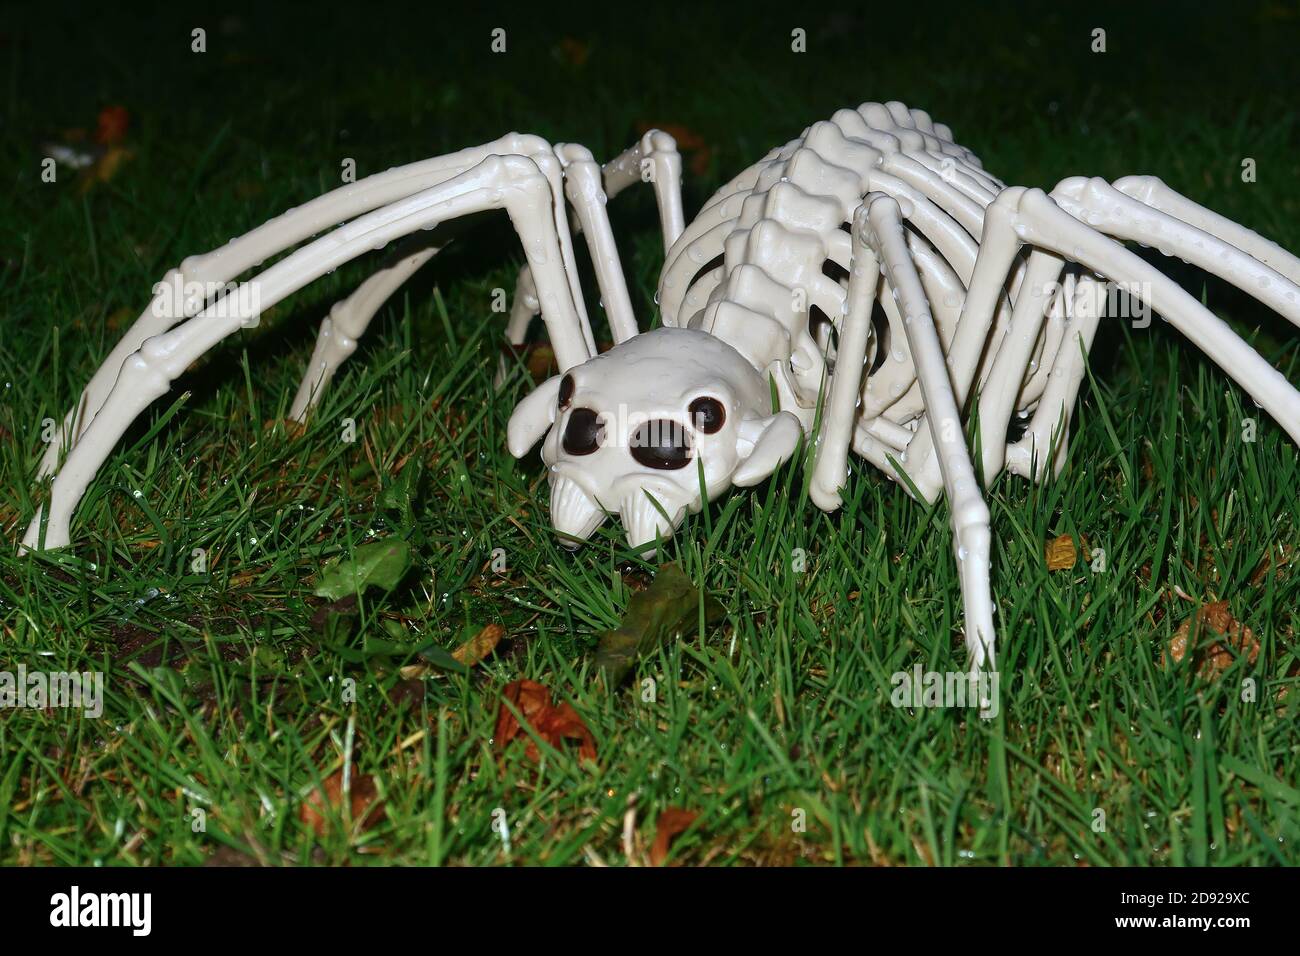 Large Scary Spider hunting on All hallows eve Stock Photo